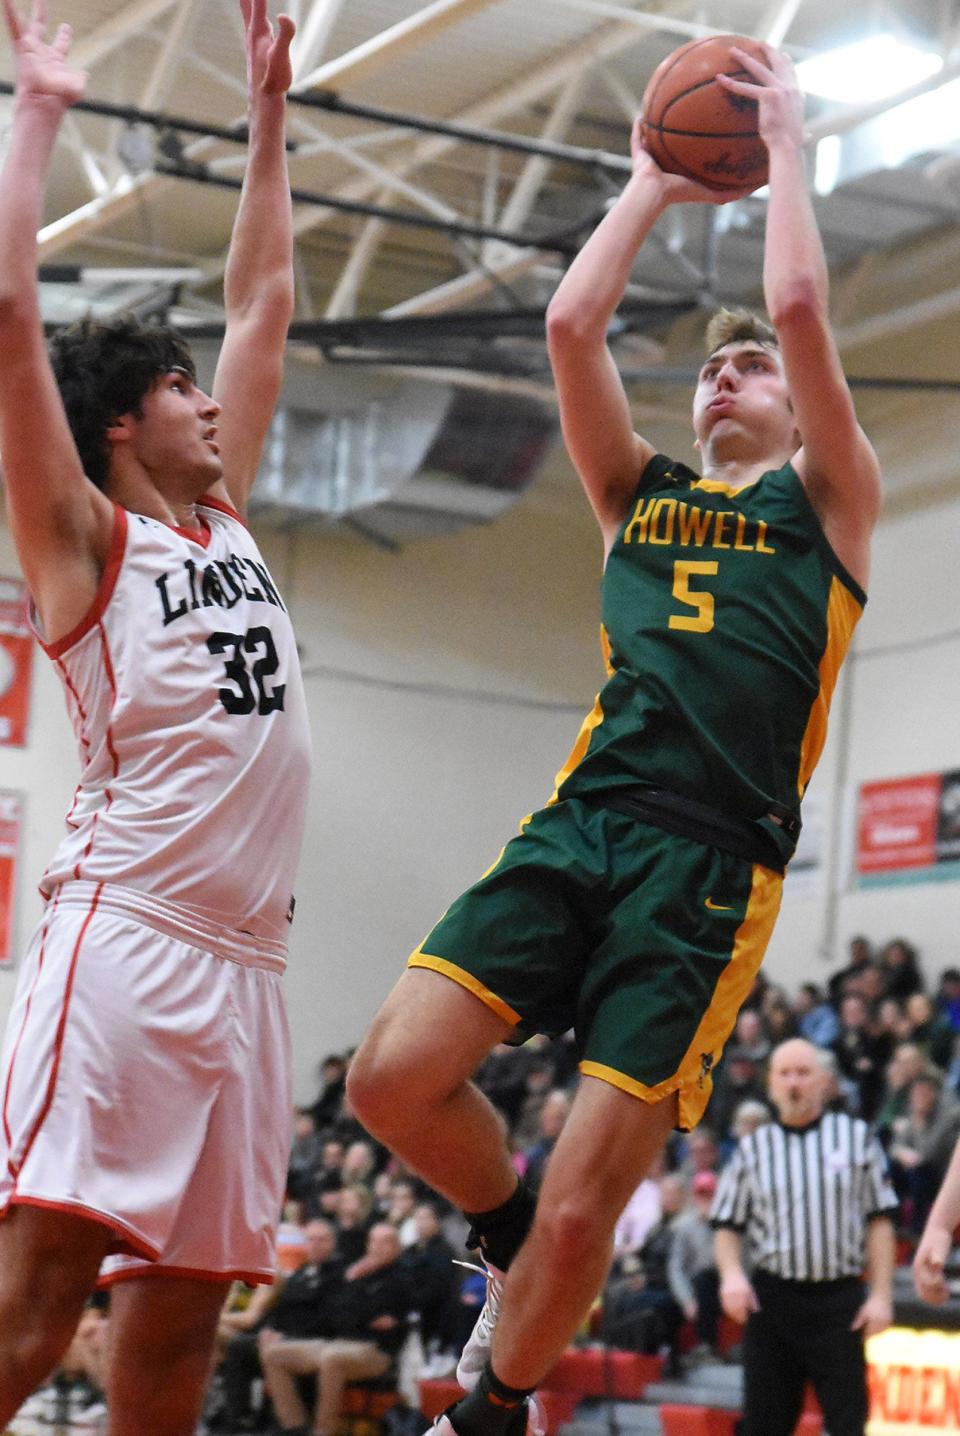 Logan Leppek (5) scored a game-high 18 points for Howell in a 69-38 victory over Linden in a first-round Division 1 district basketball game Monday, March 6, 2023.